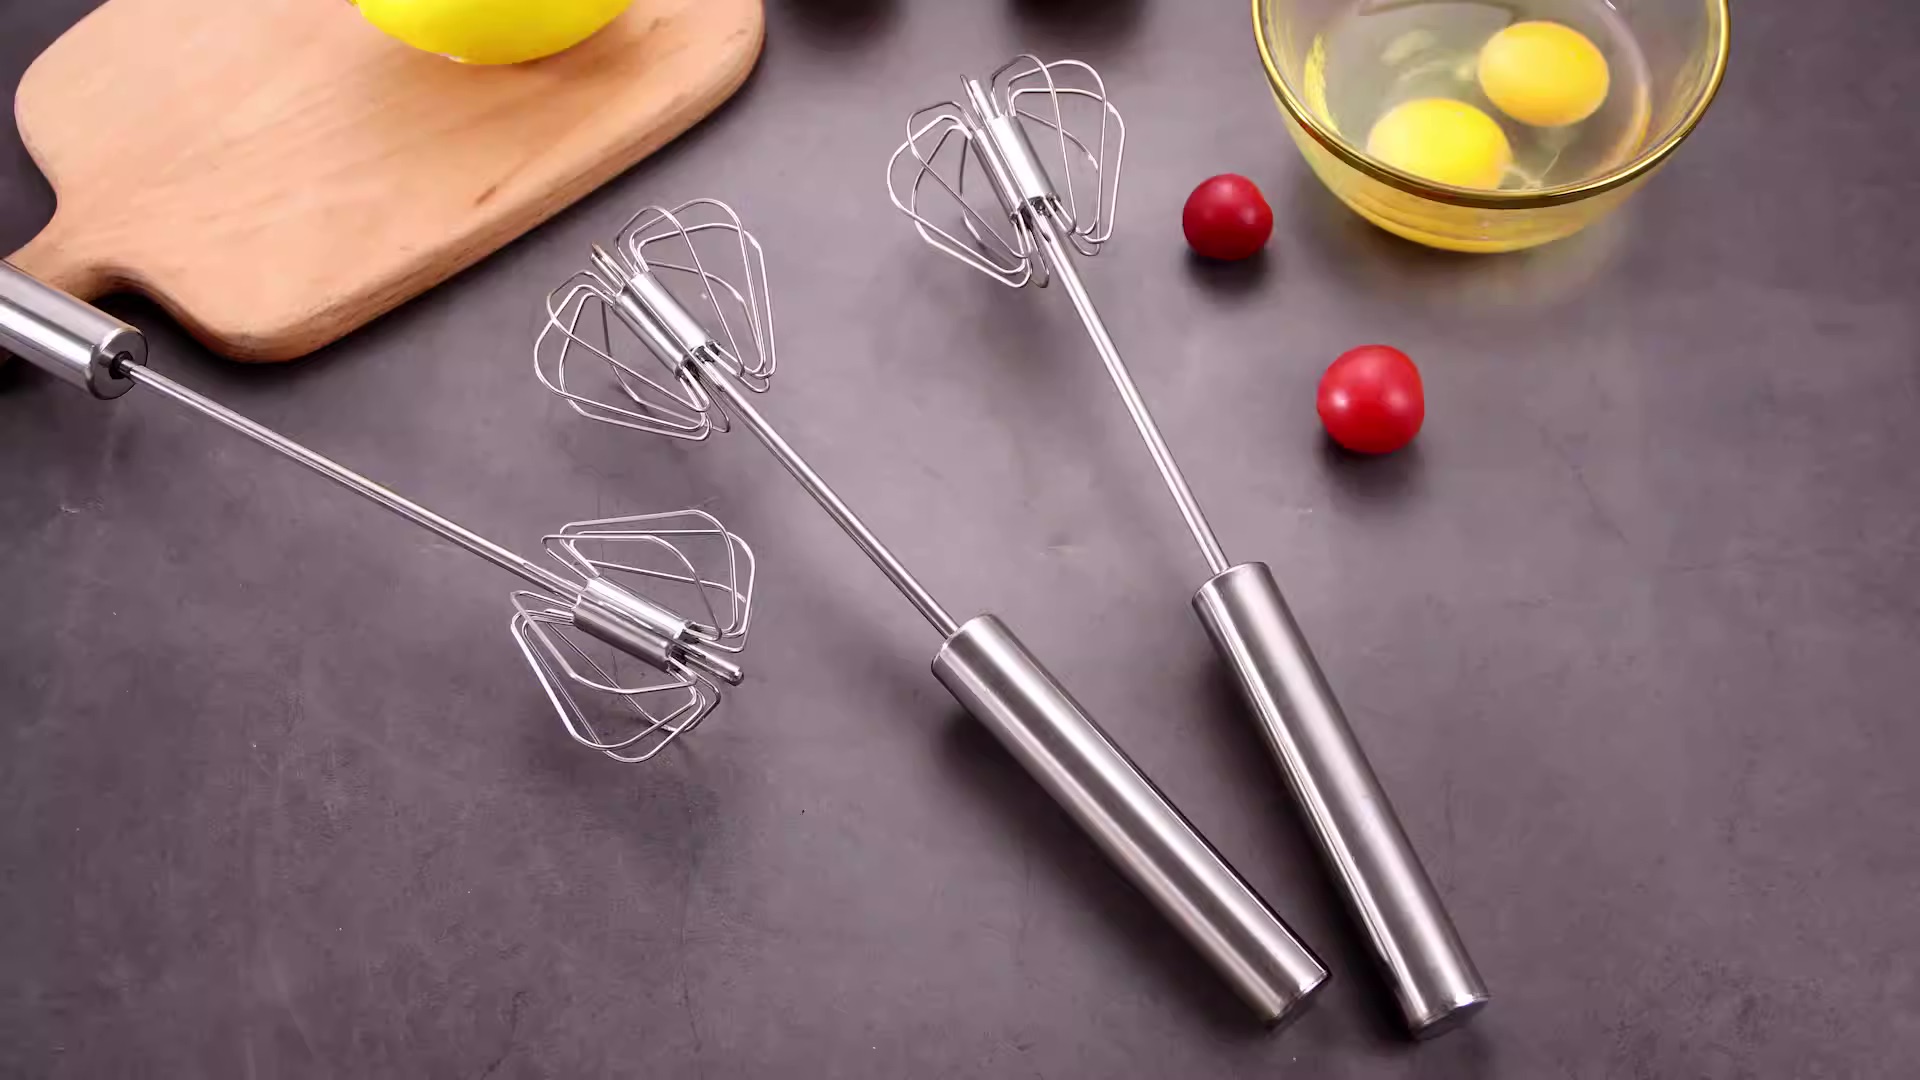 Egg Beater Spin Whisk, Hand Push Semi-Automatic Collapsible Non Scratch  Flat Bottom w/Egg Separator